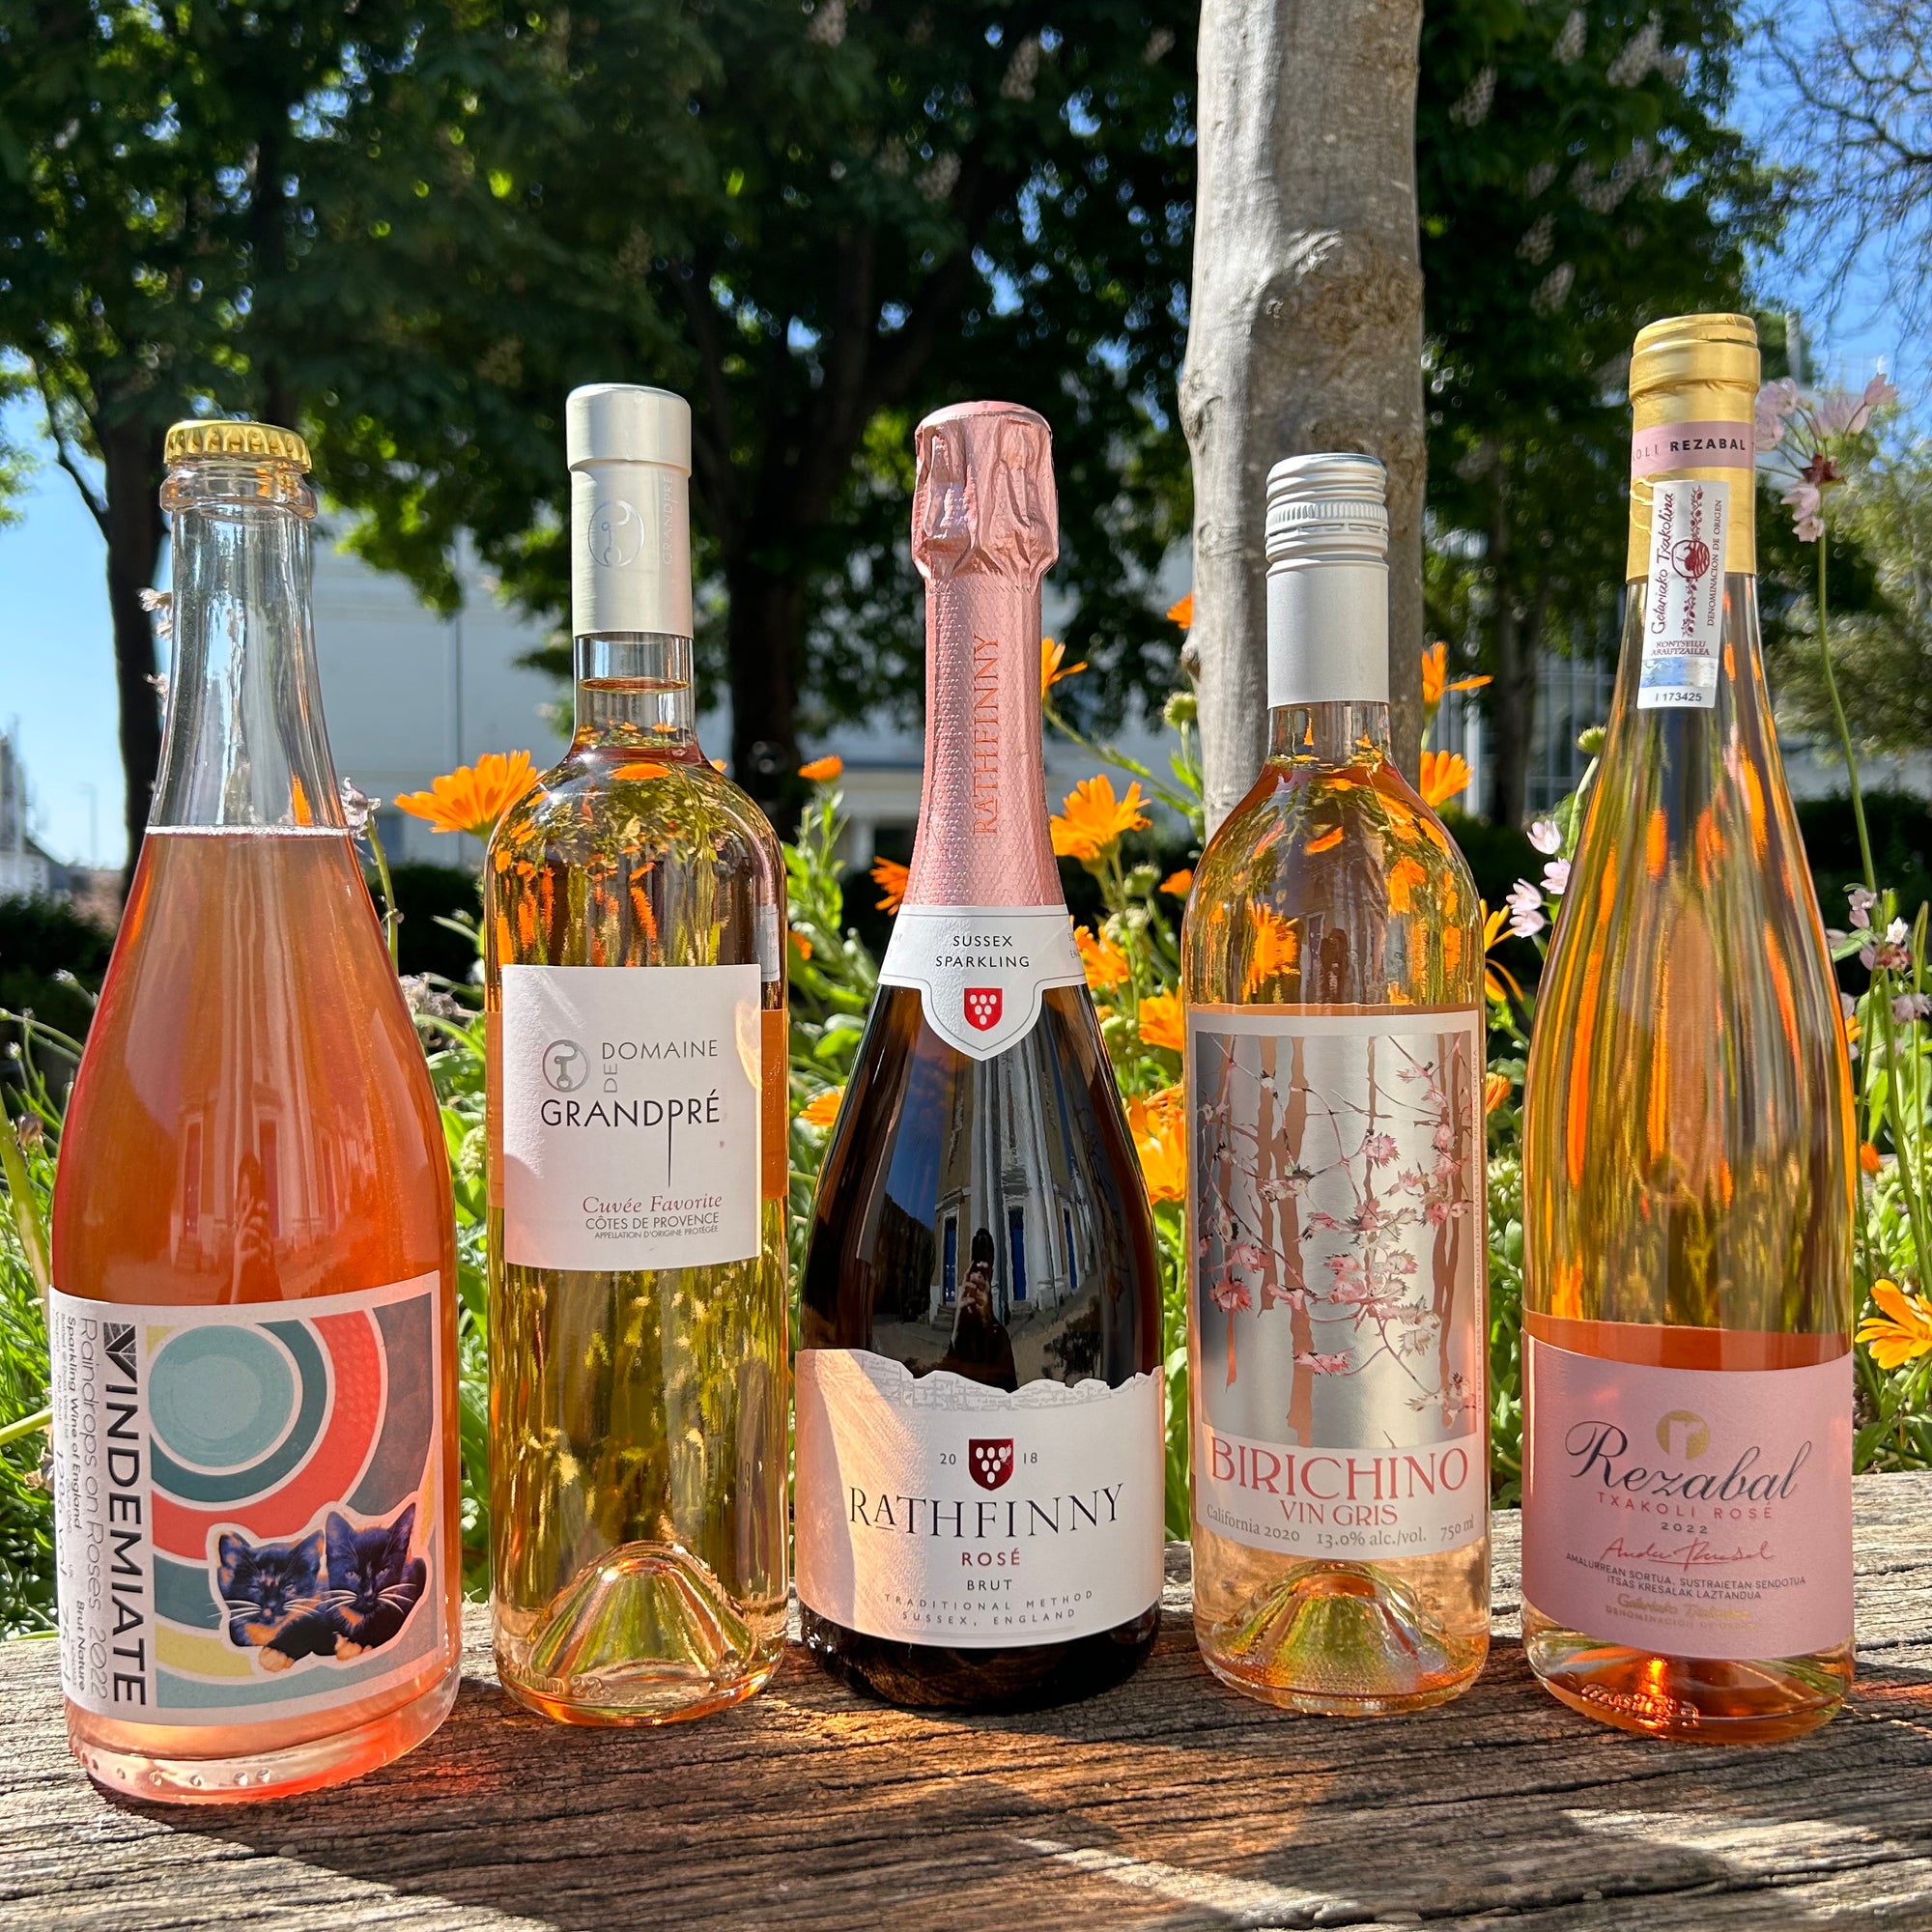 Rosé: The Best of Both Worlds